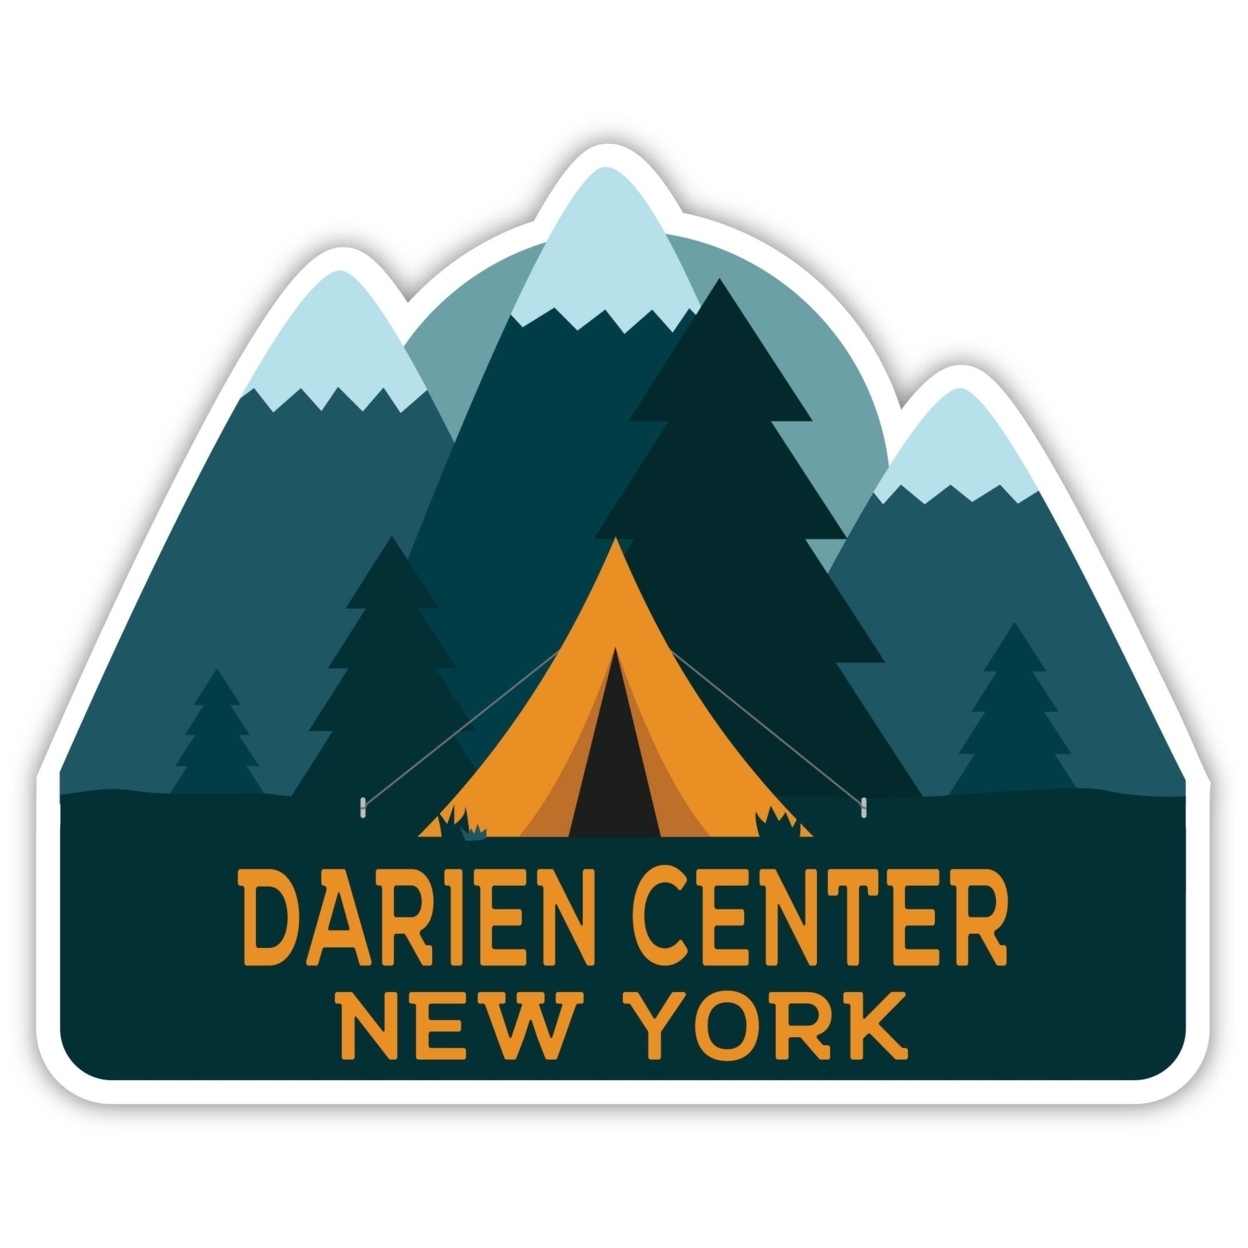 Darien Center New York Souvenir Decorative Stickers (Choose Theme And Size) - 4-Pack, 12-Inch, Tent